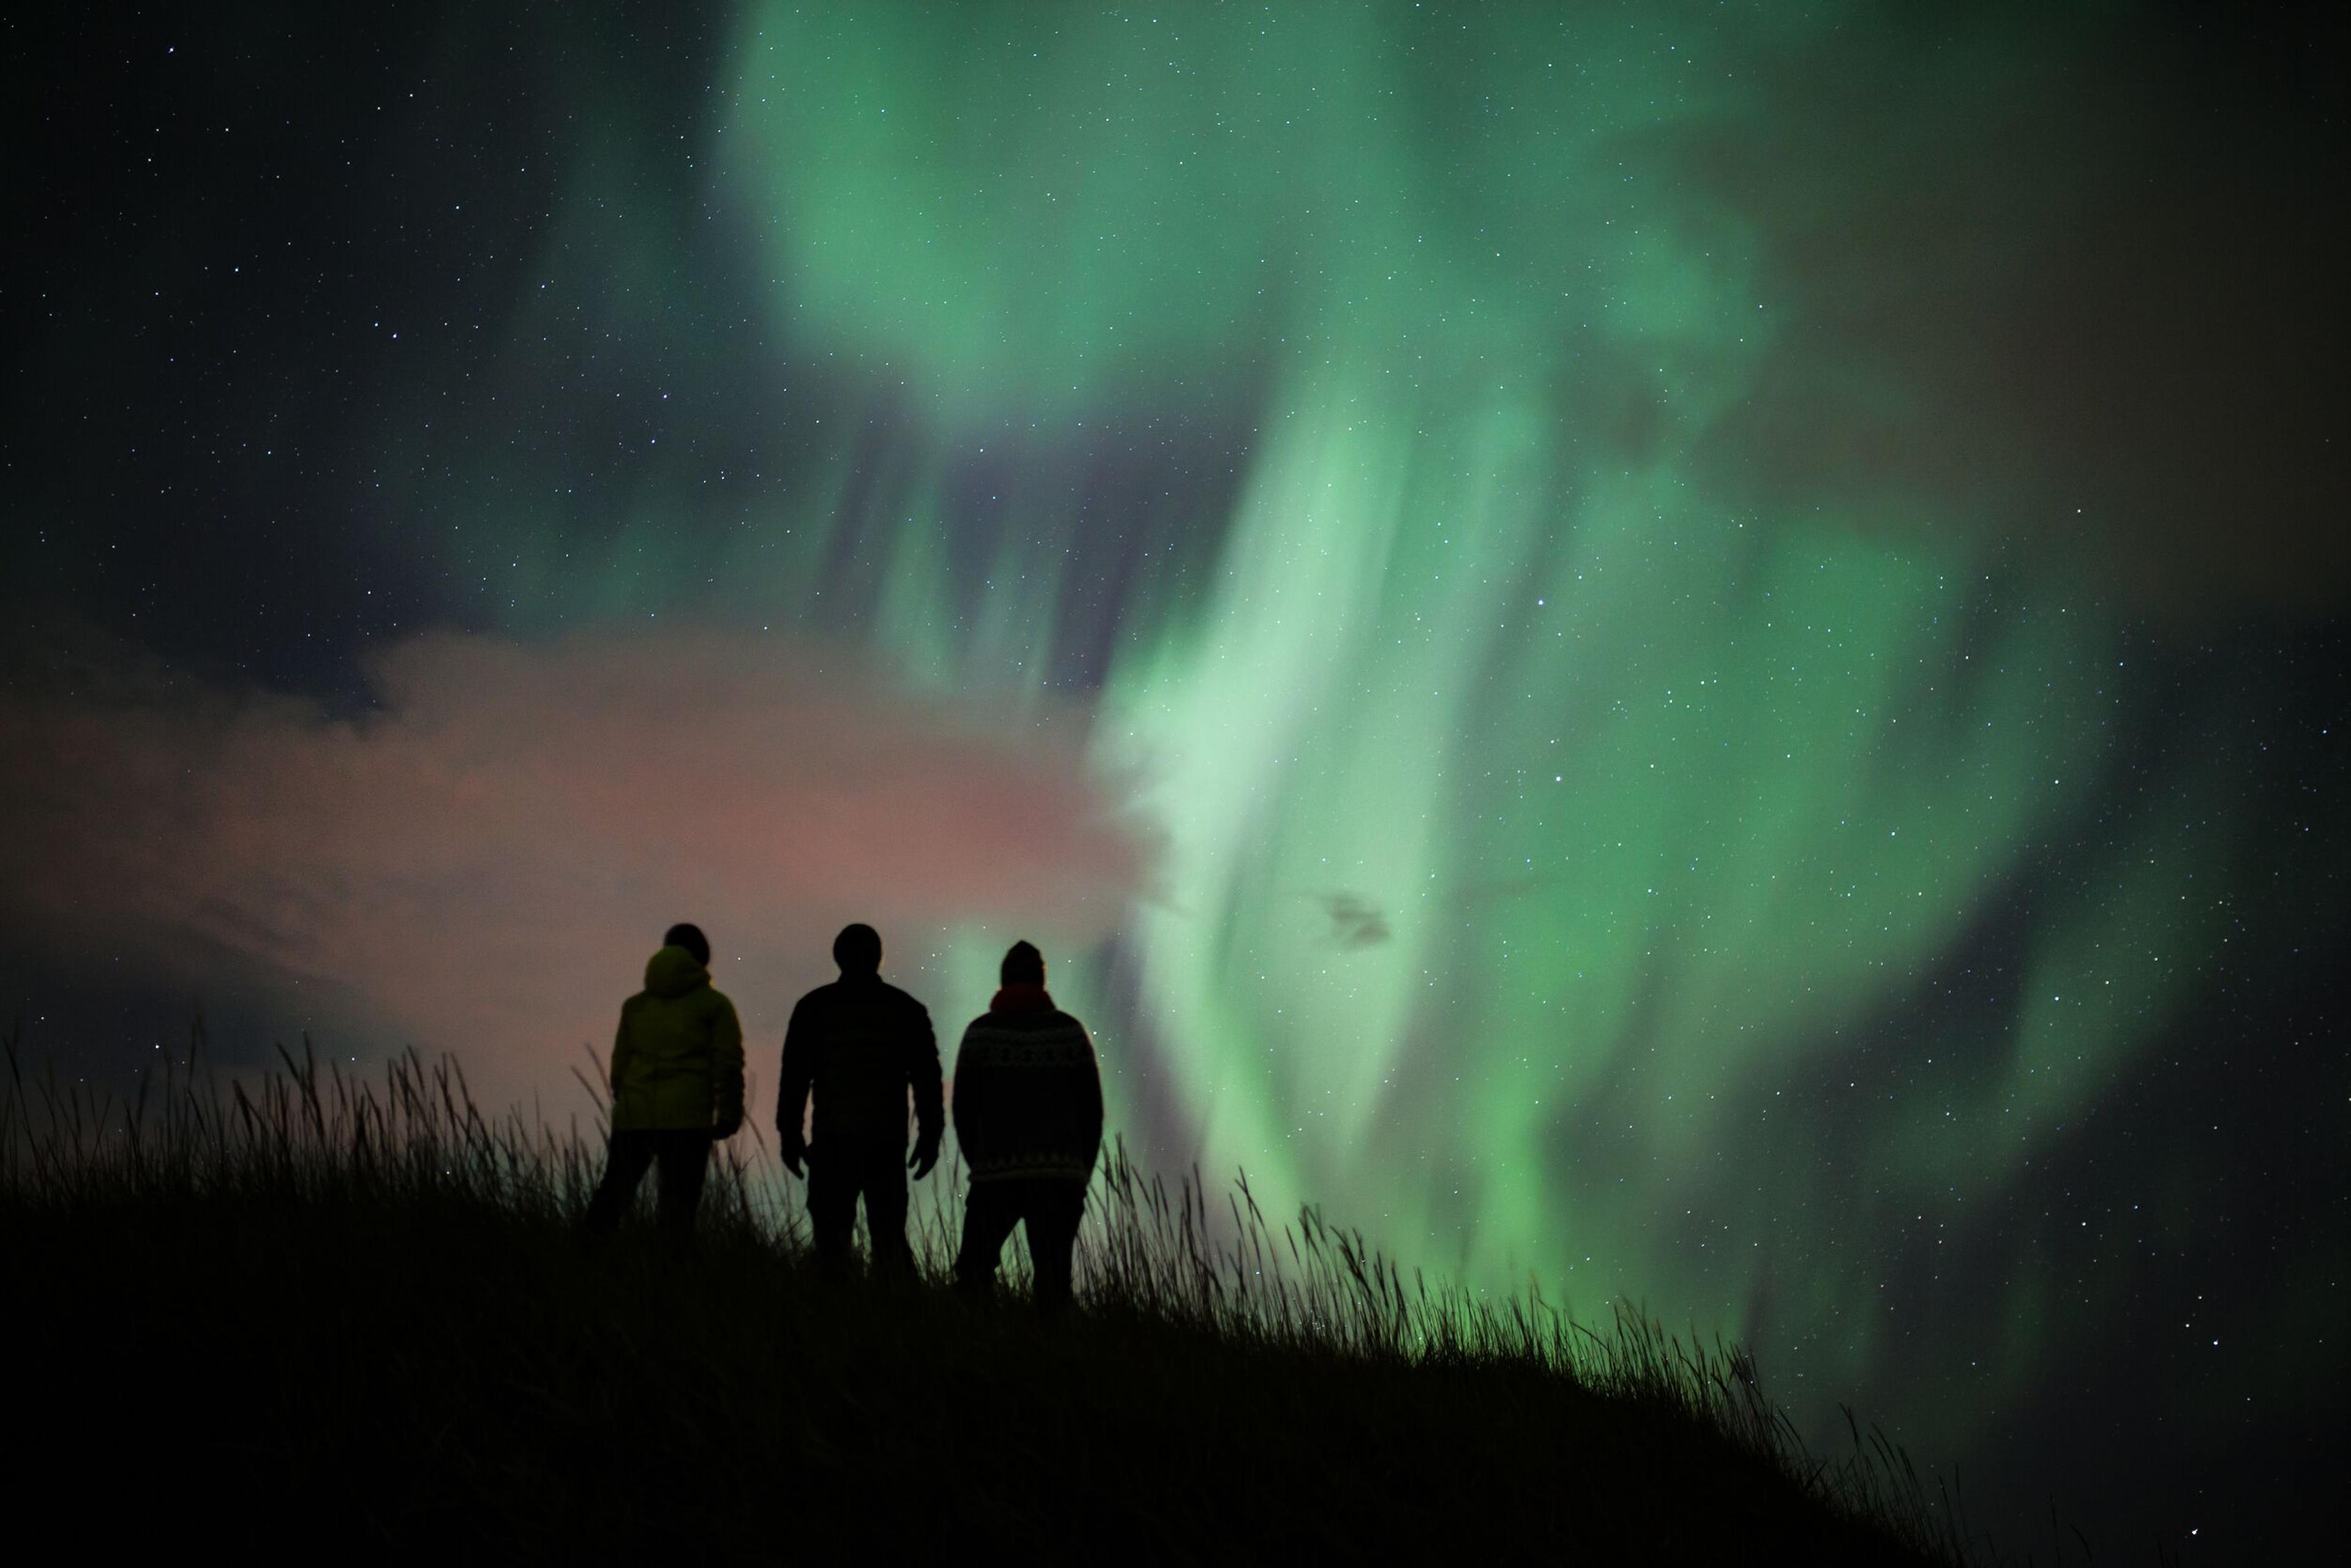 Three silhouetted figures stand against a night sky, observing the magnificent Northern Lights.